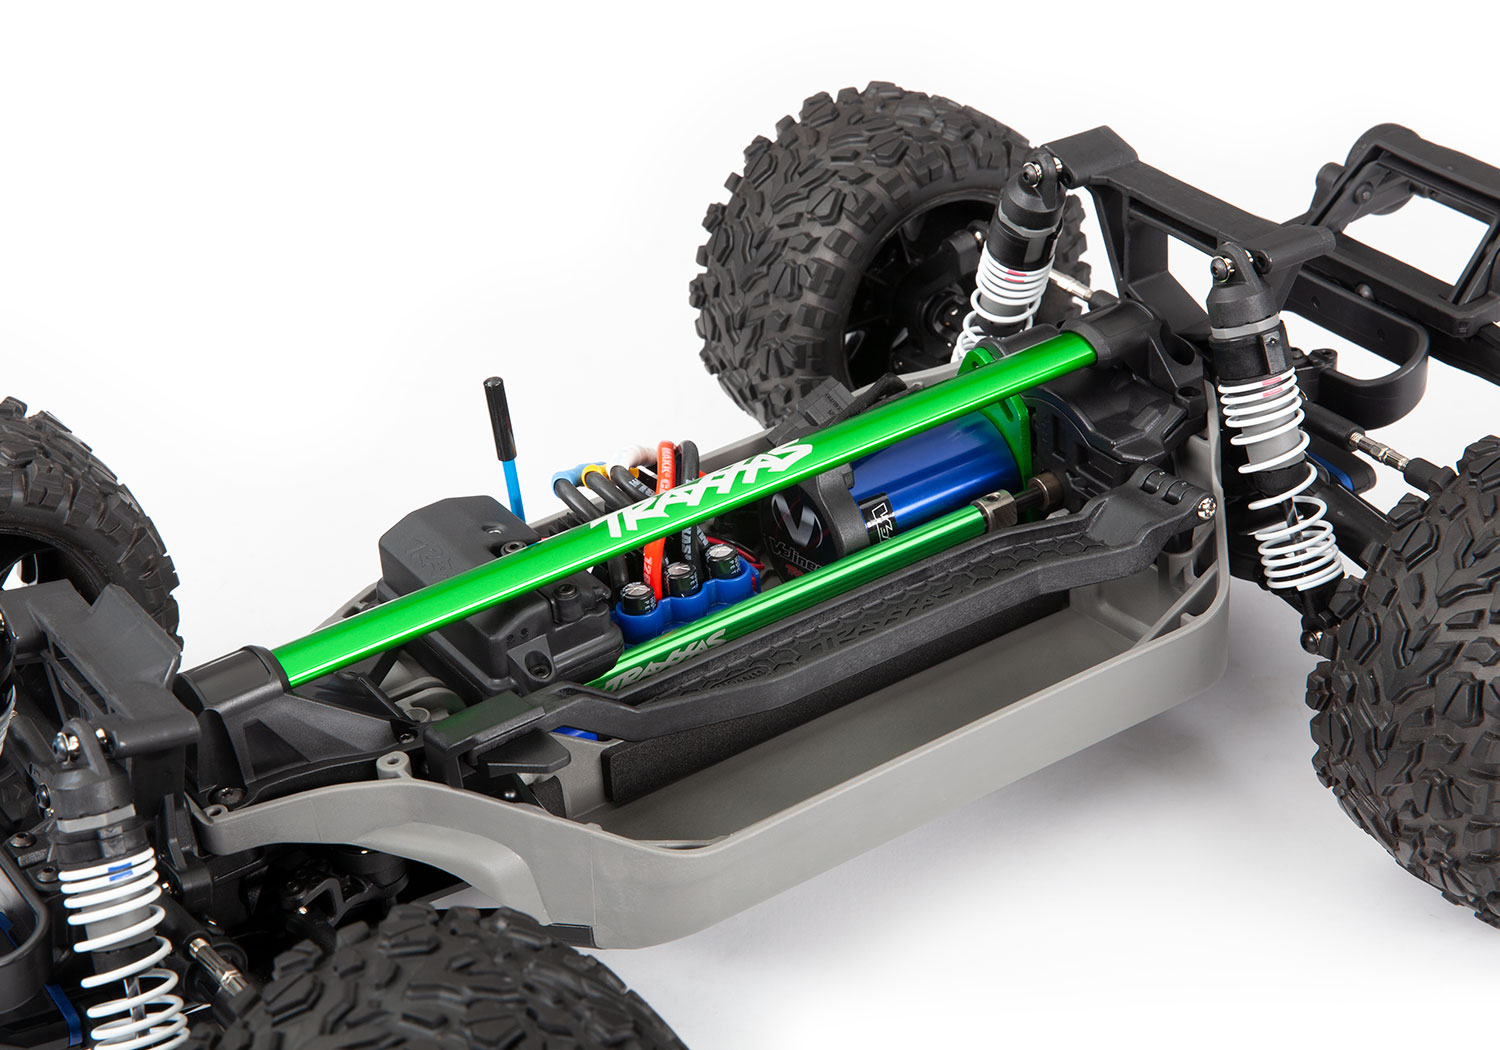 Traxxas Chassis brace kit, green (fits Rustler 4X4 or Slash 4X4 models equipped with Low-CG chassis) - TRX6730G